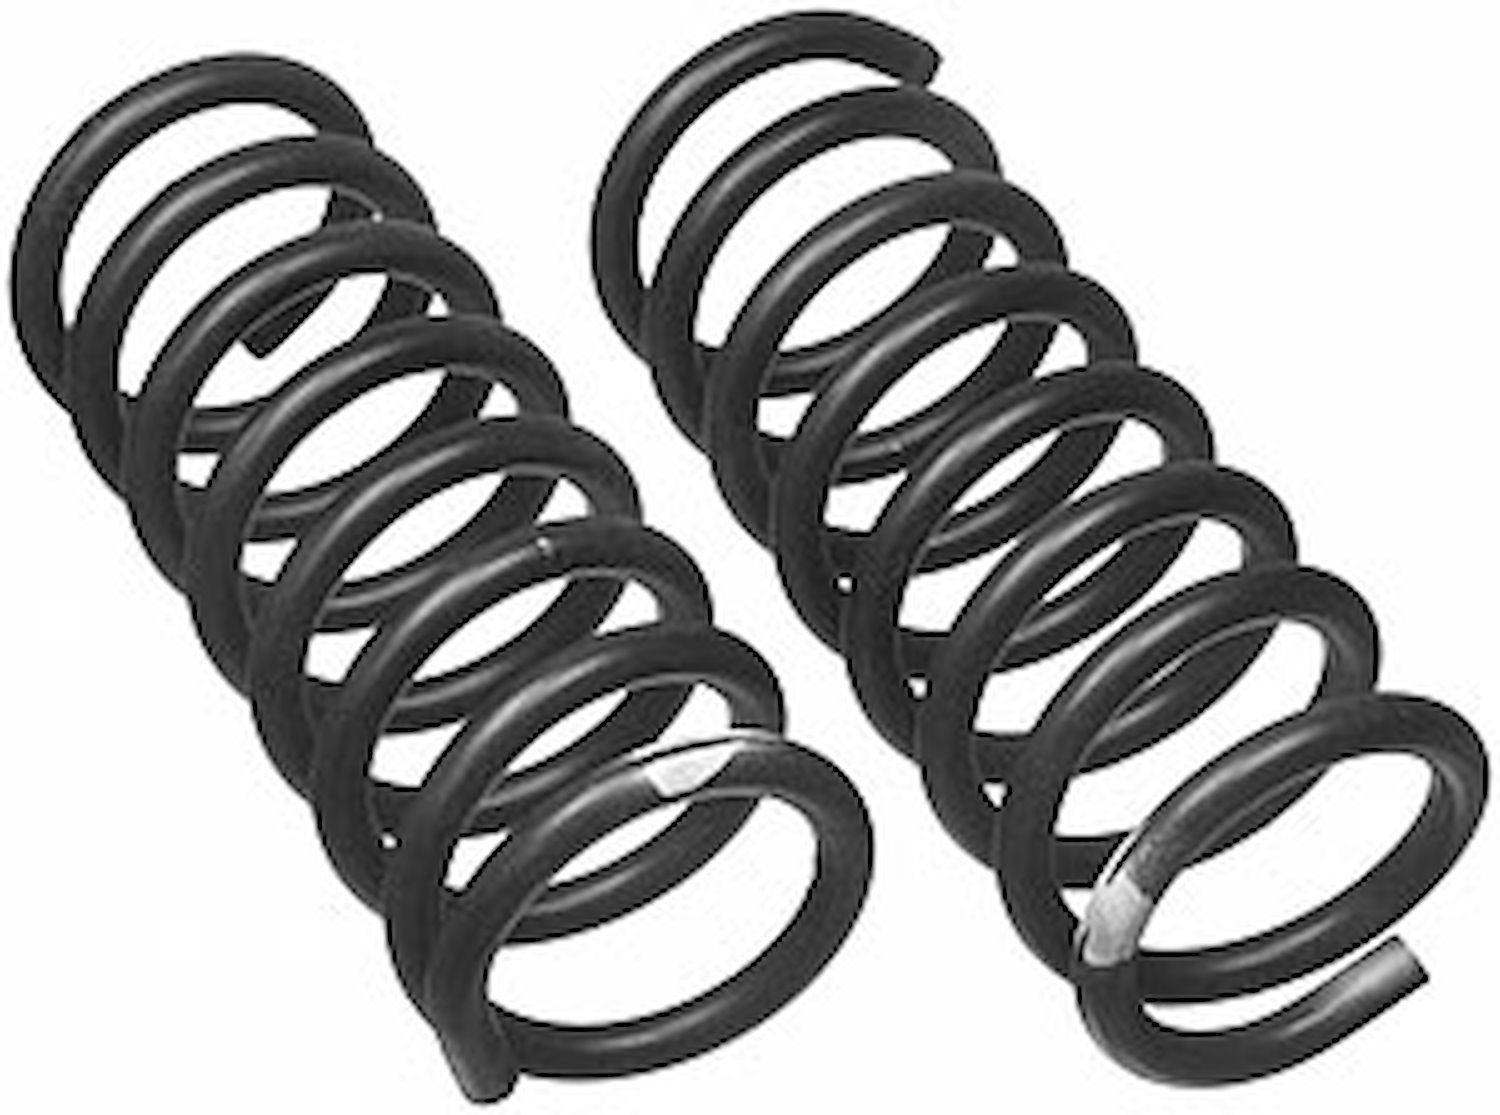 Front Coil Springs Fit Select 1971-1978 Dodge Trucks, Plymouth Vans